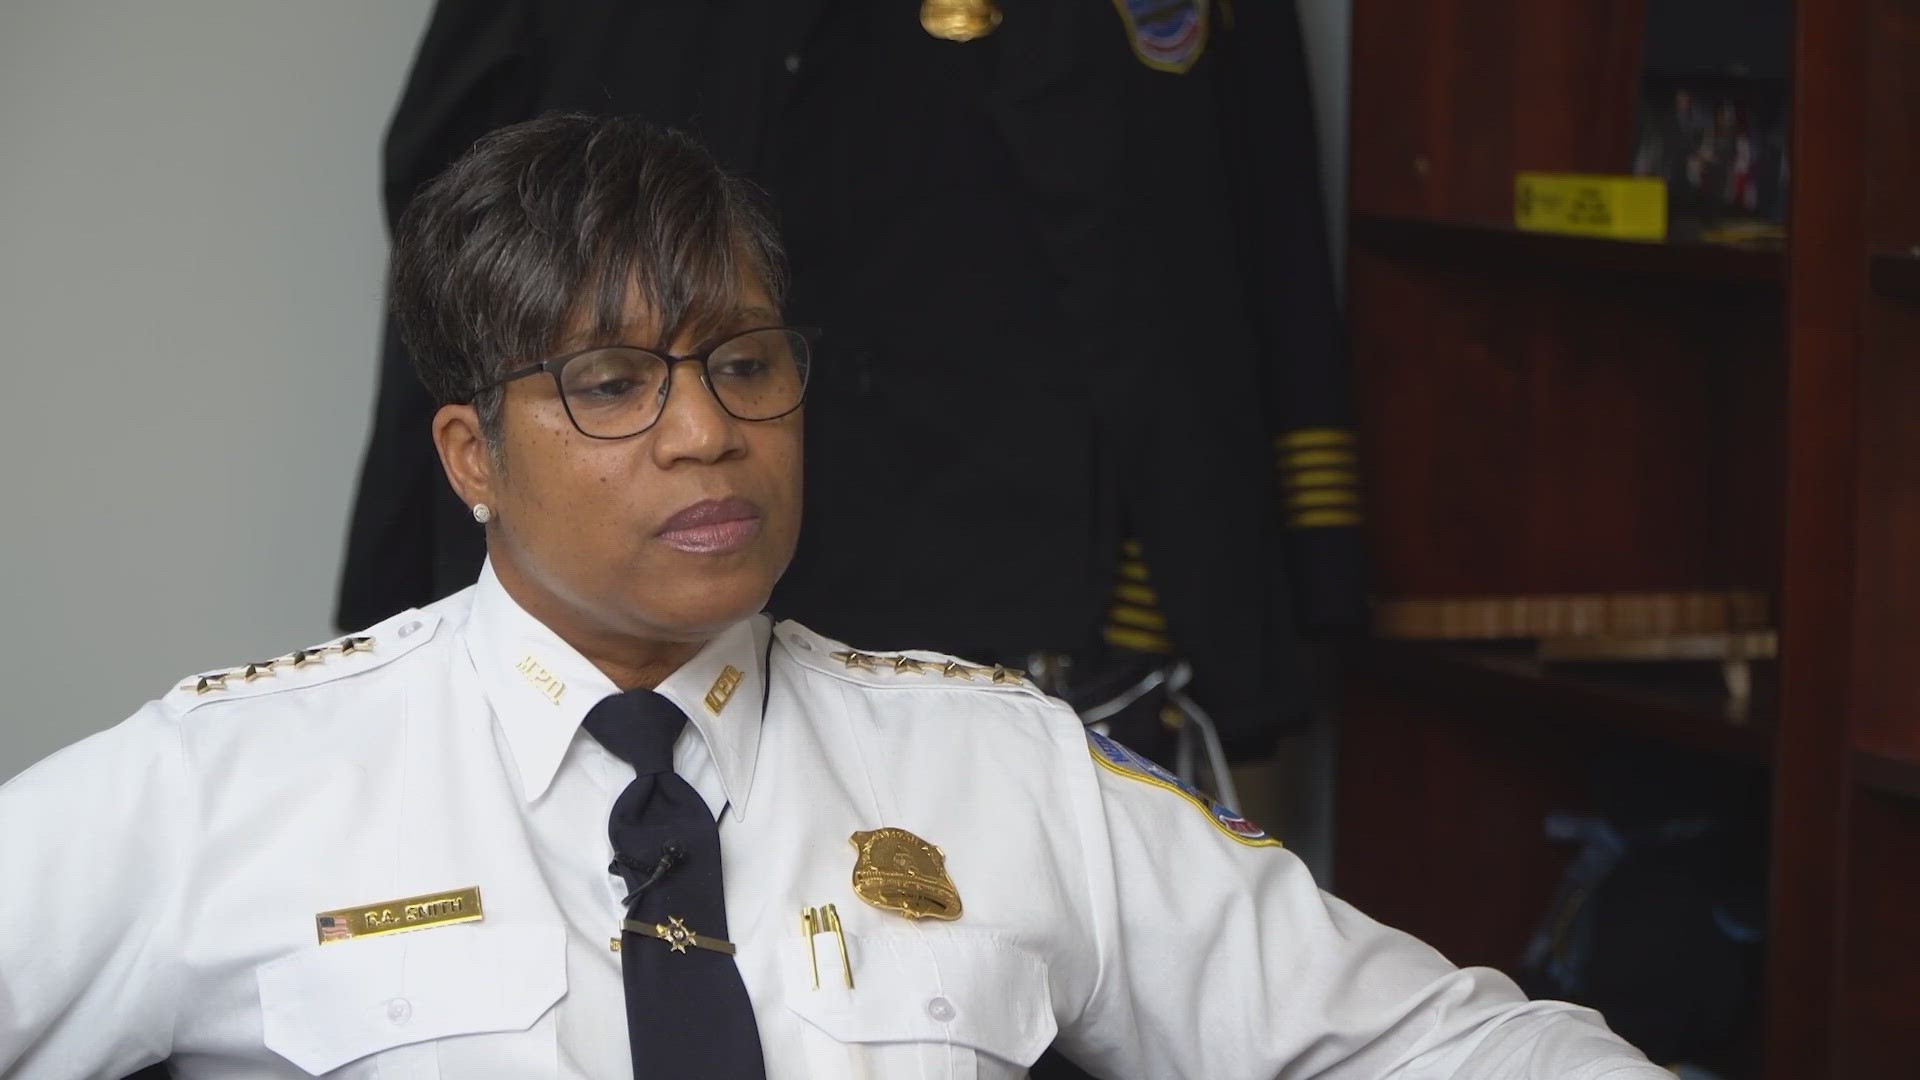 “I think we’re moving in the right direction, we’re doing the things I’ve tasked the officials and the officers to do,” said MPD Chief Pamela Smith.